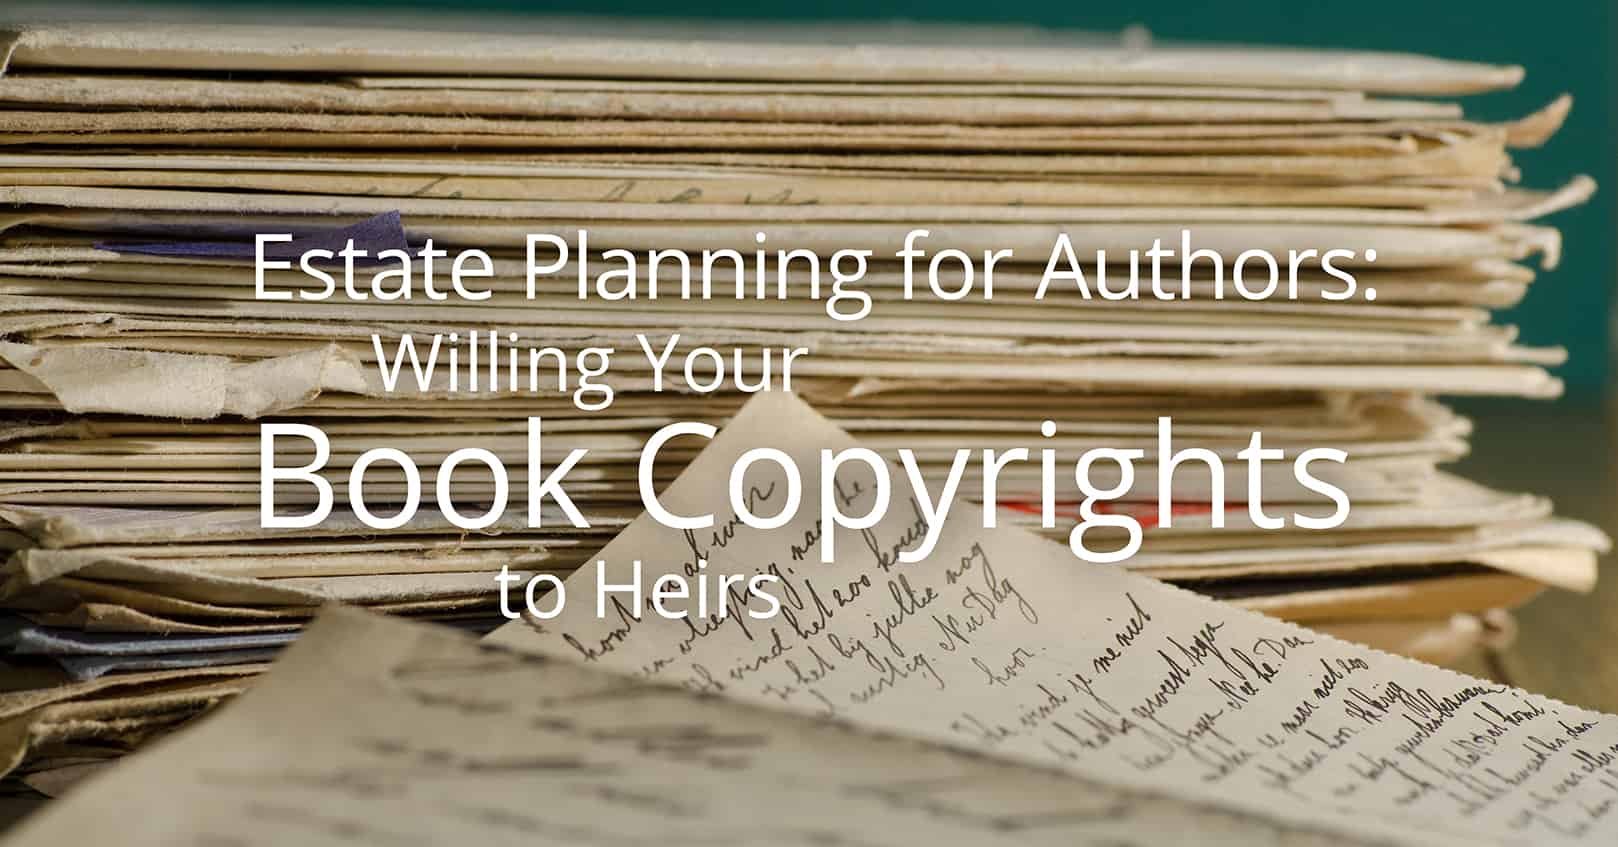 Estate Planning for Authors: Willing Your Book Copyrights to Heirs